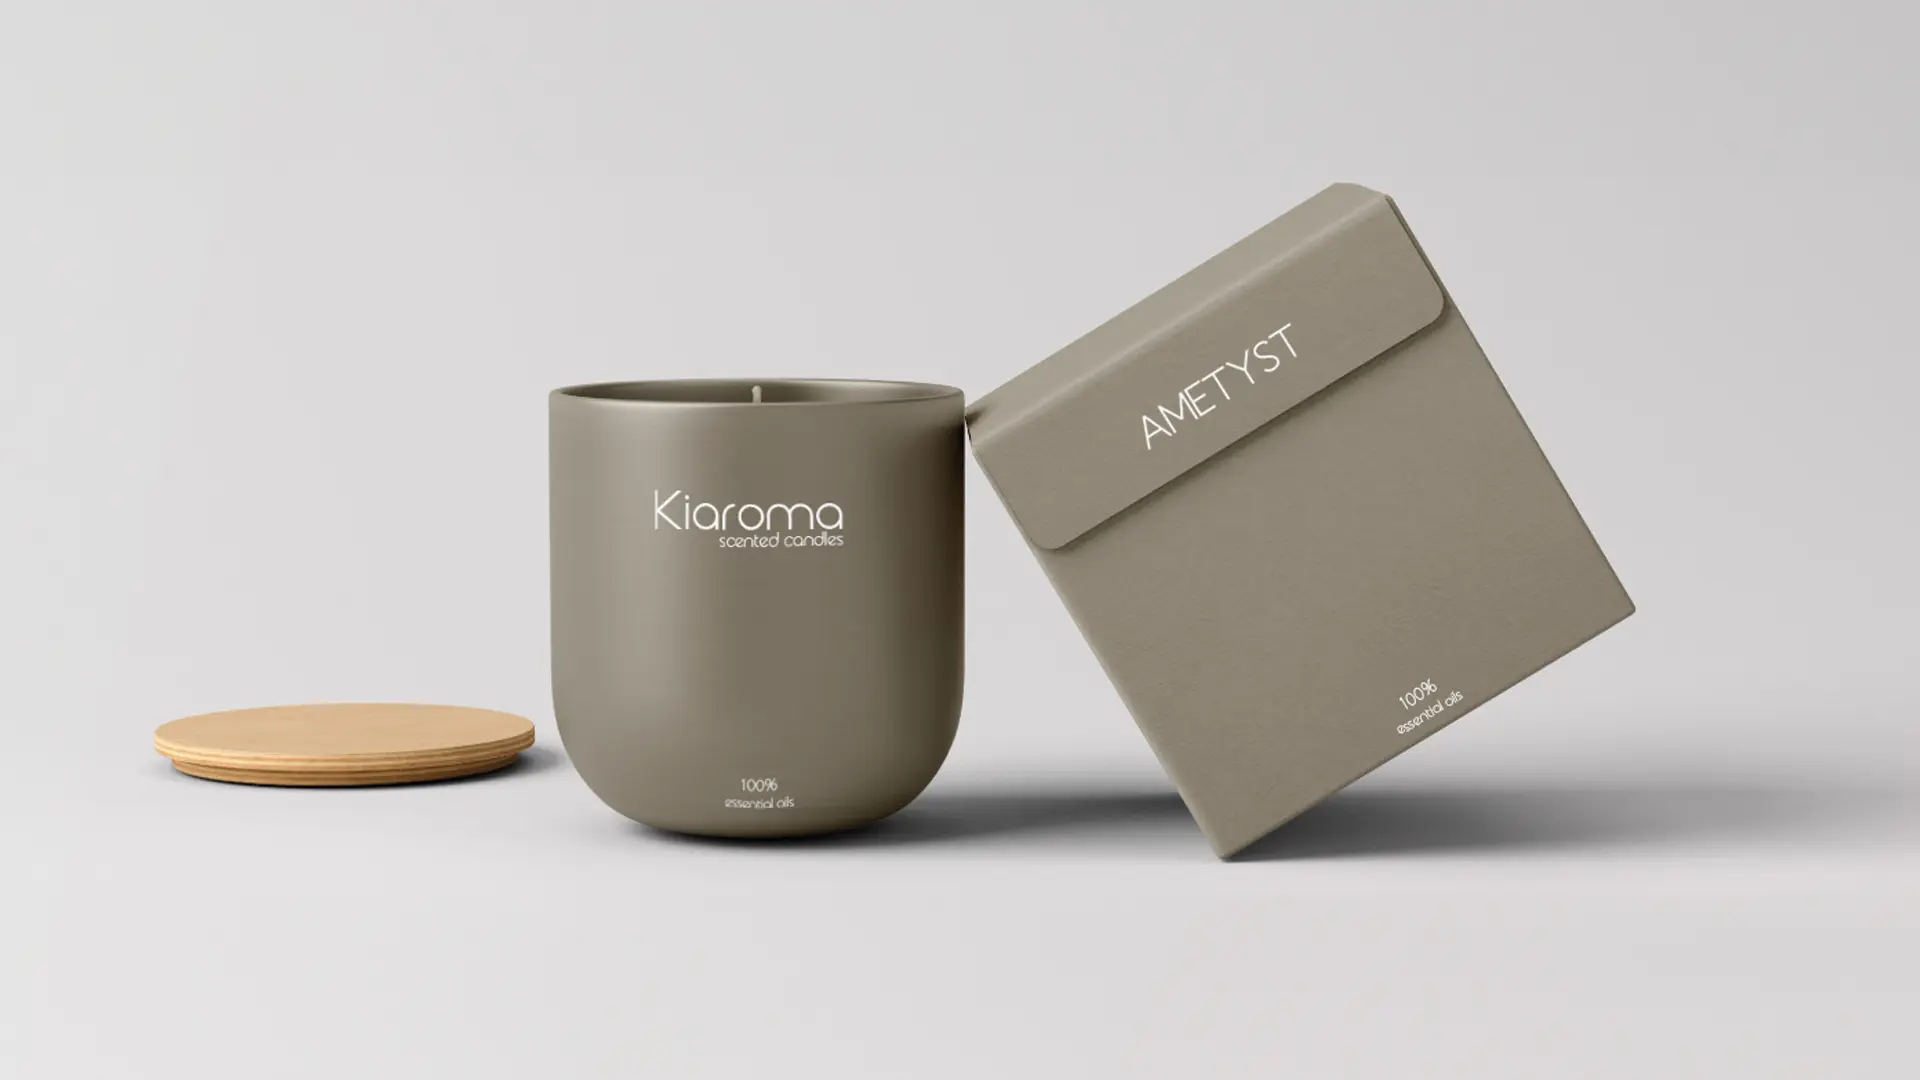 Product design for Kiaroma Scented candles showing a box and a candle jar with branding on it.